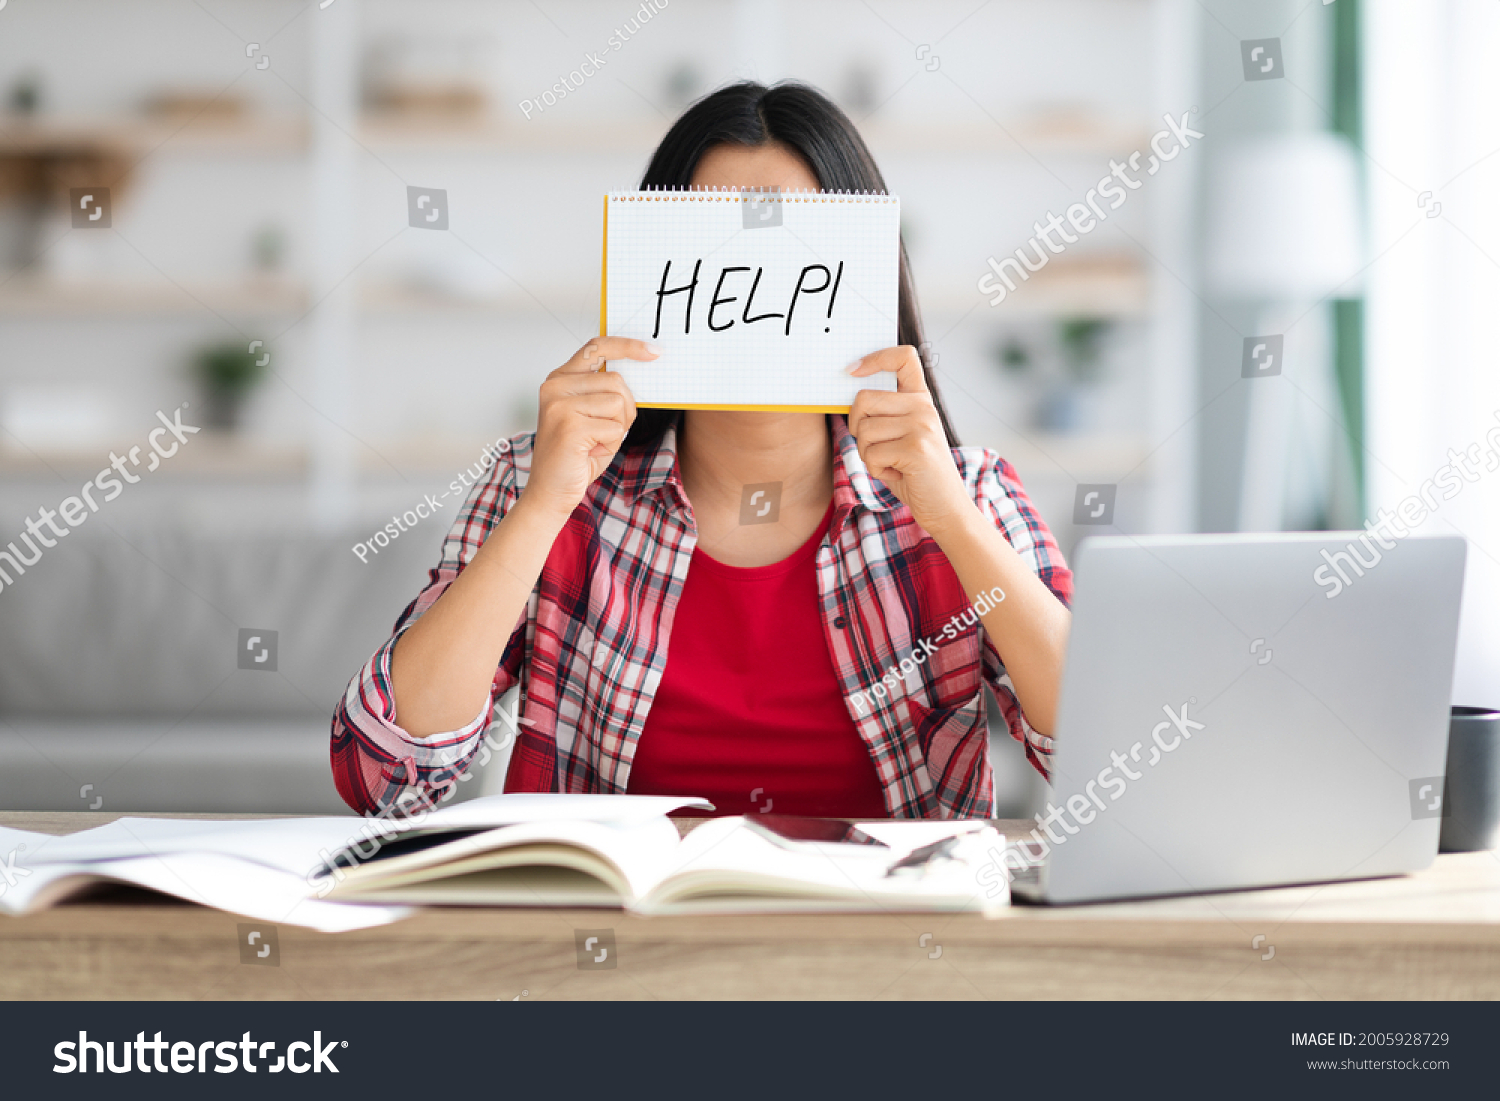 Stressed Unrecognizable Female Holding Leaflet With Drawn Help Word In Front Of Face While Study Online With Laptop At Home, Student Woman Suffering Problems With Remote Education, Closeup #2005928729